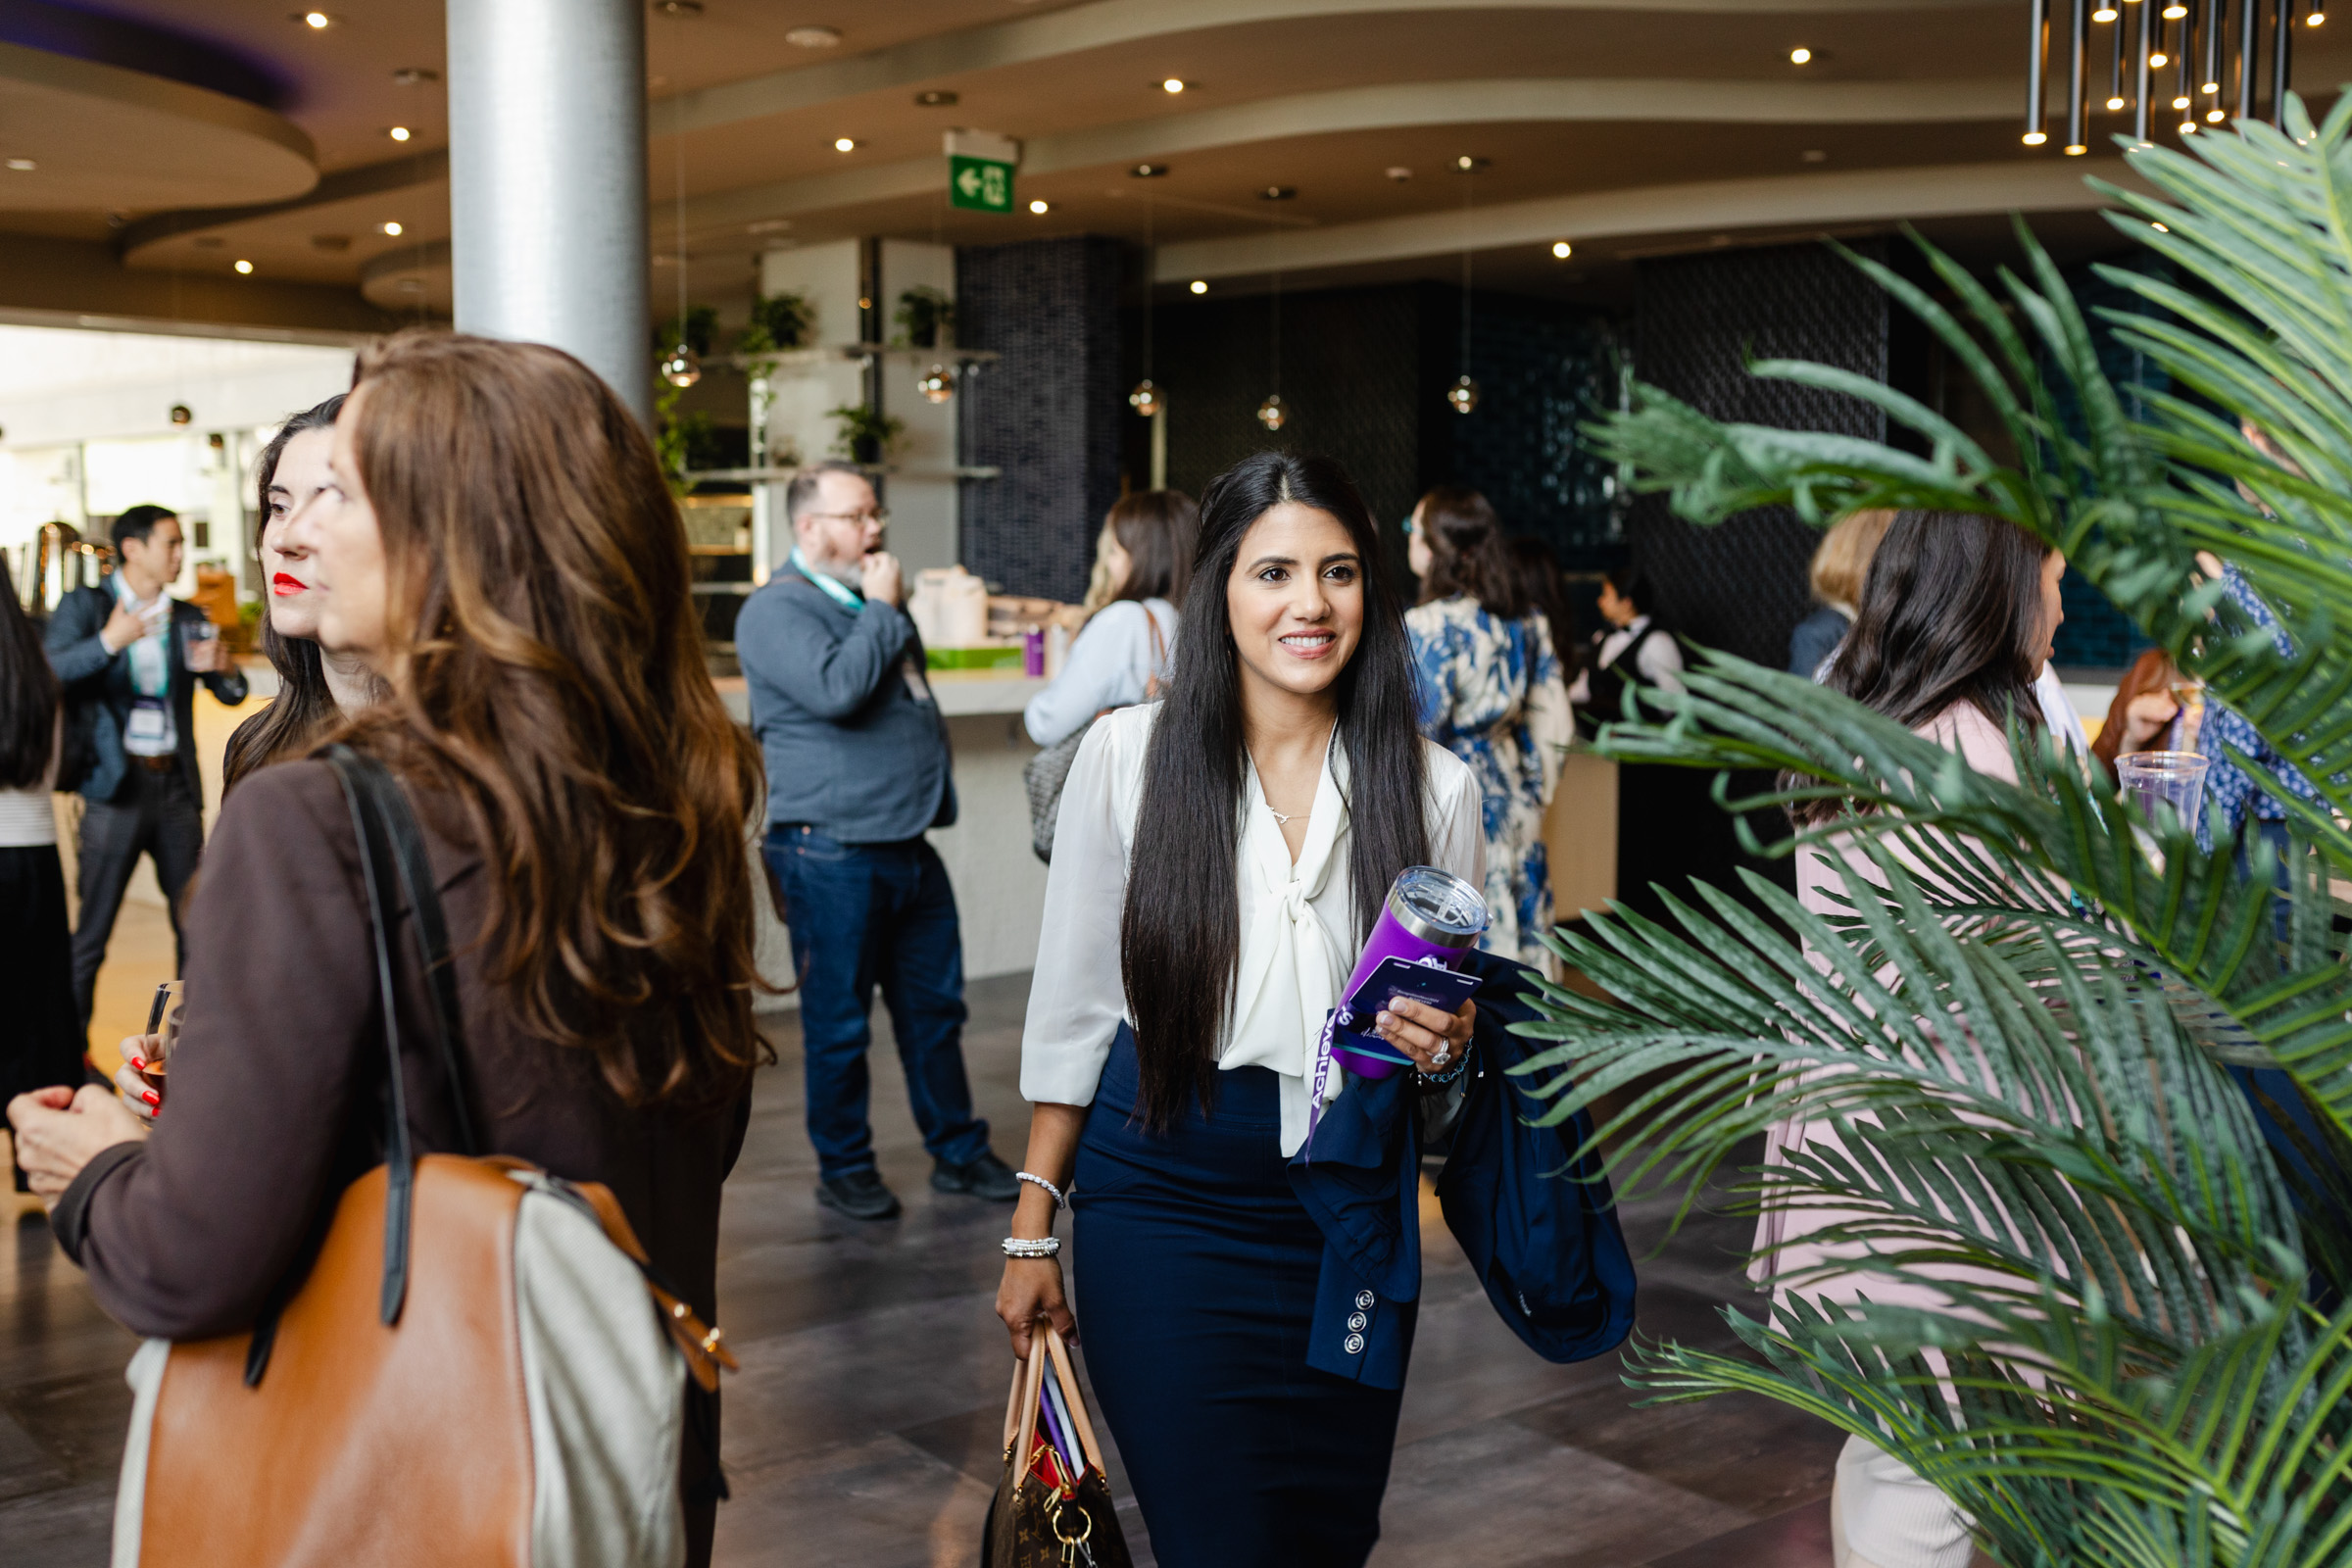 People are attending an indoor networking event. Some individuals are engaged in conversation while others are walking around the space. Event photography captures the scene, with plants and modern decor in the background adding to the atmosphere.